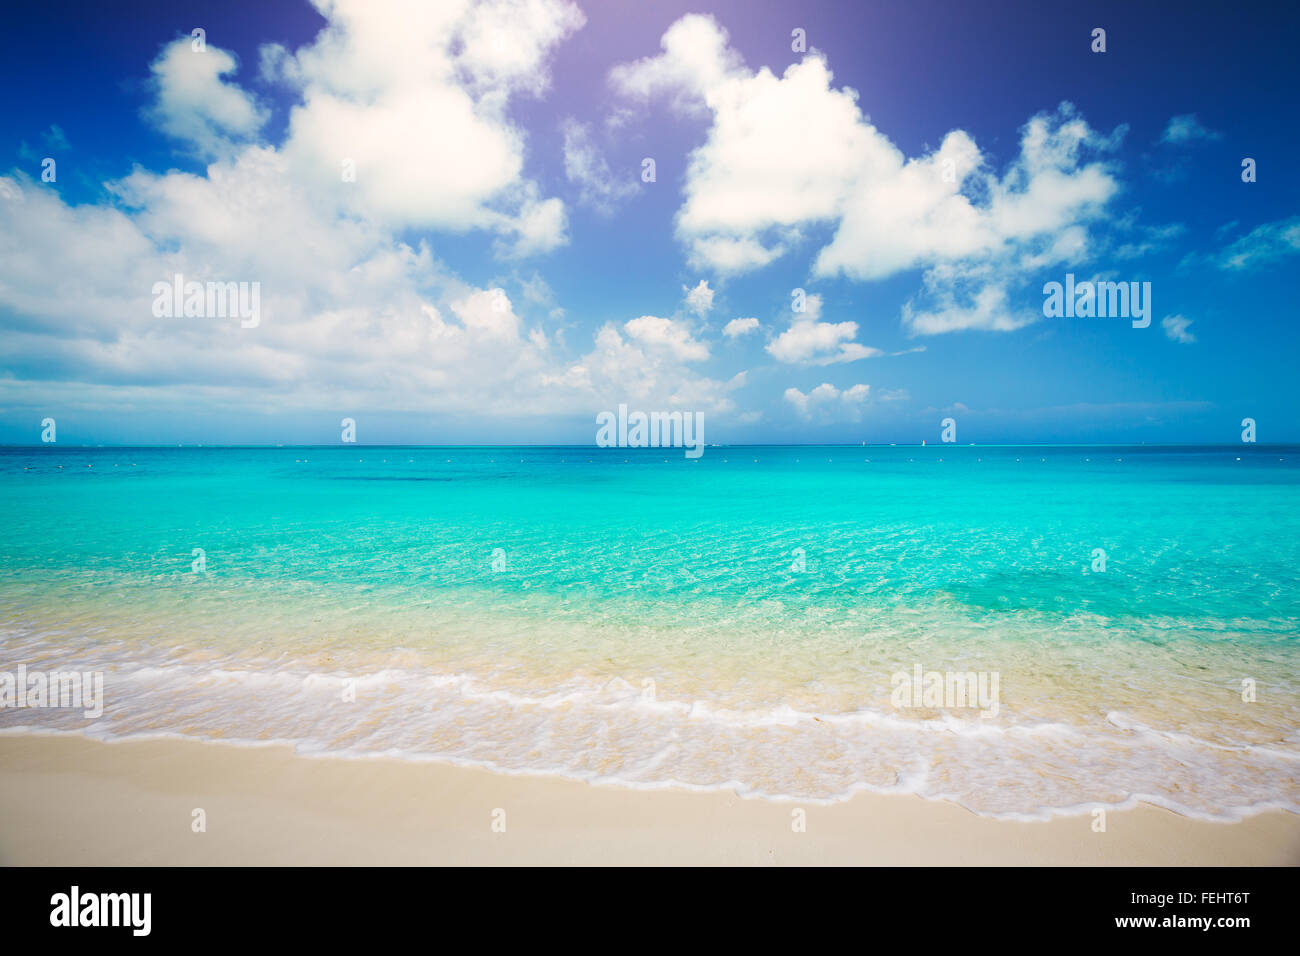 Tropical White Sand Beach and Sea, Travel Vacation Concept Background Stock Photo